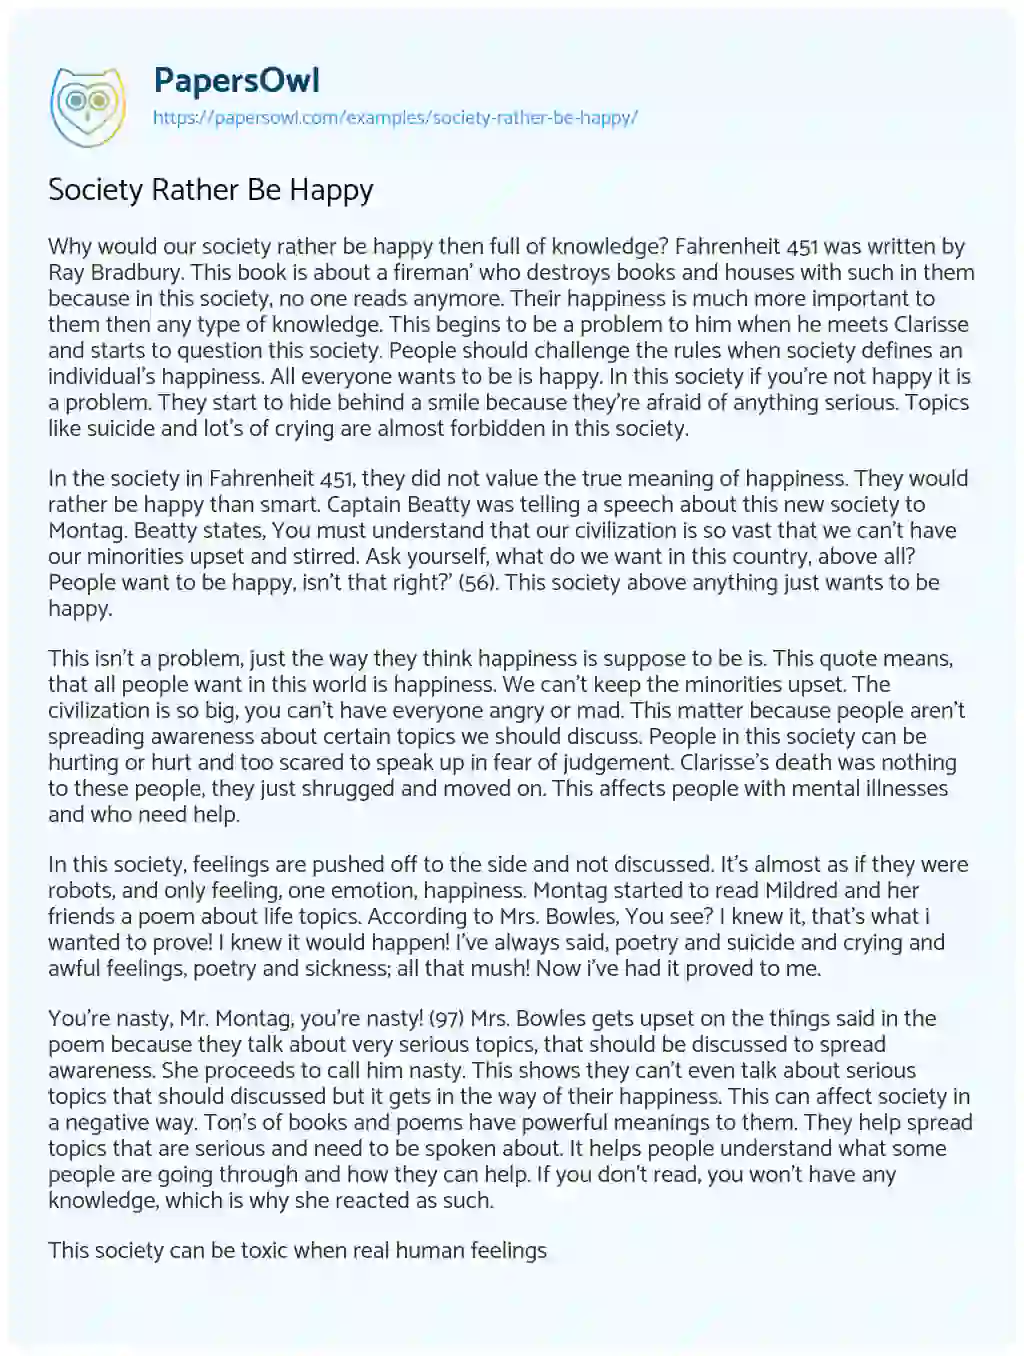 Essay on Society Rather be Happy